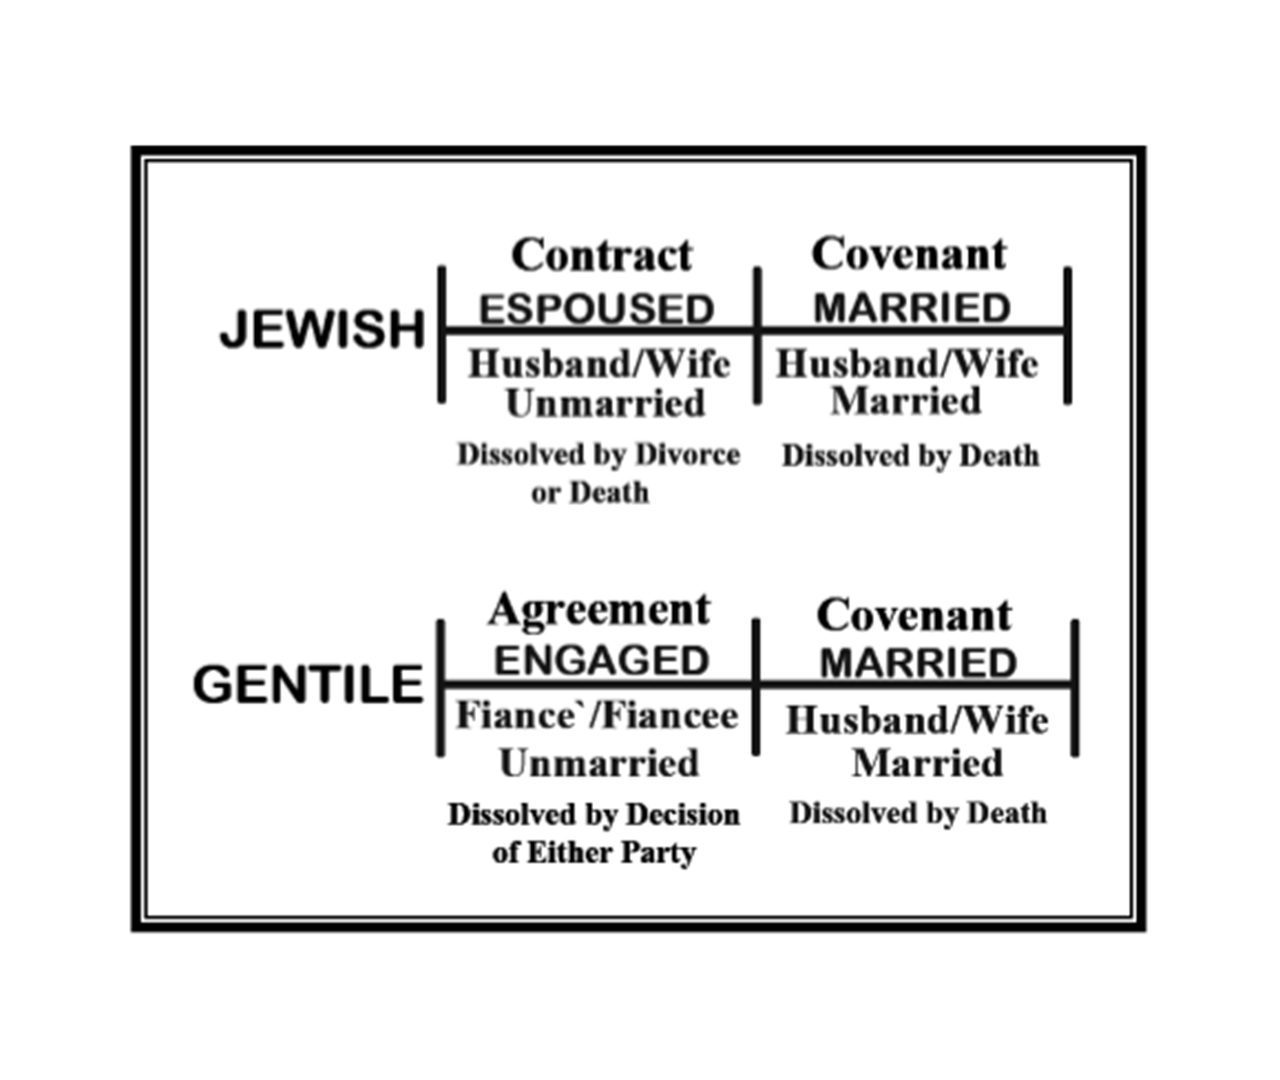 table showing contrast between Jewish and Gentile engaged and married terms